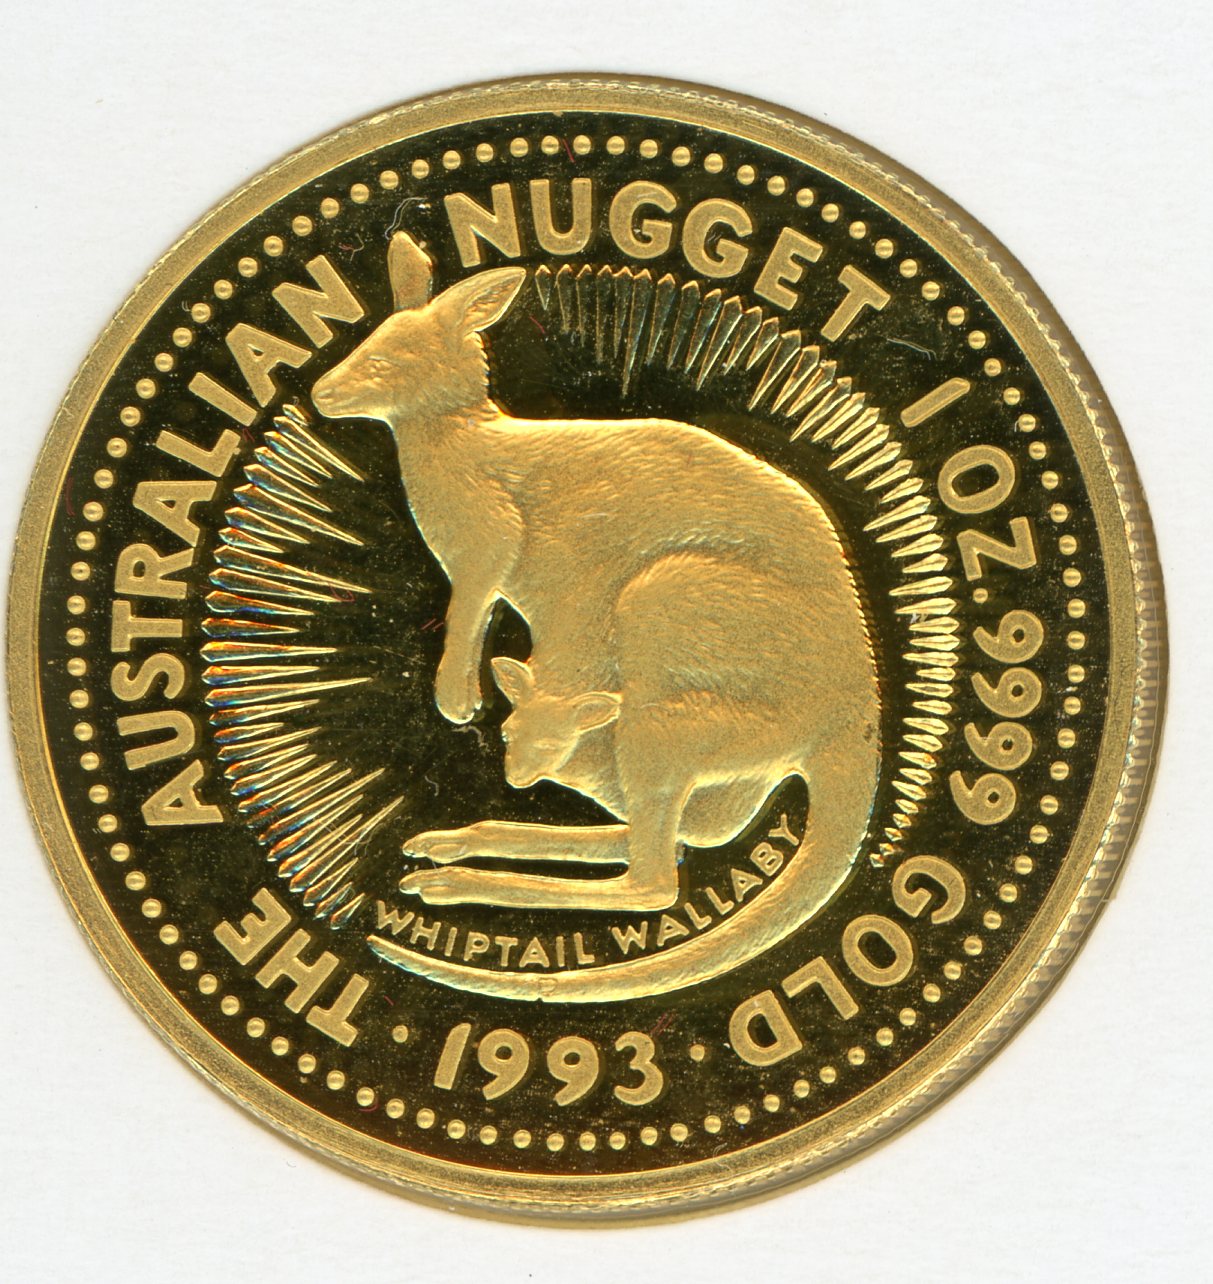 Thumbnail for 1993 One oz Gold Proof Whiptail Wallaby